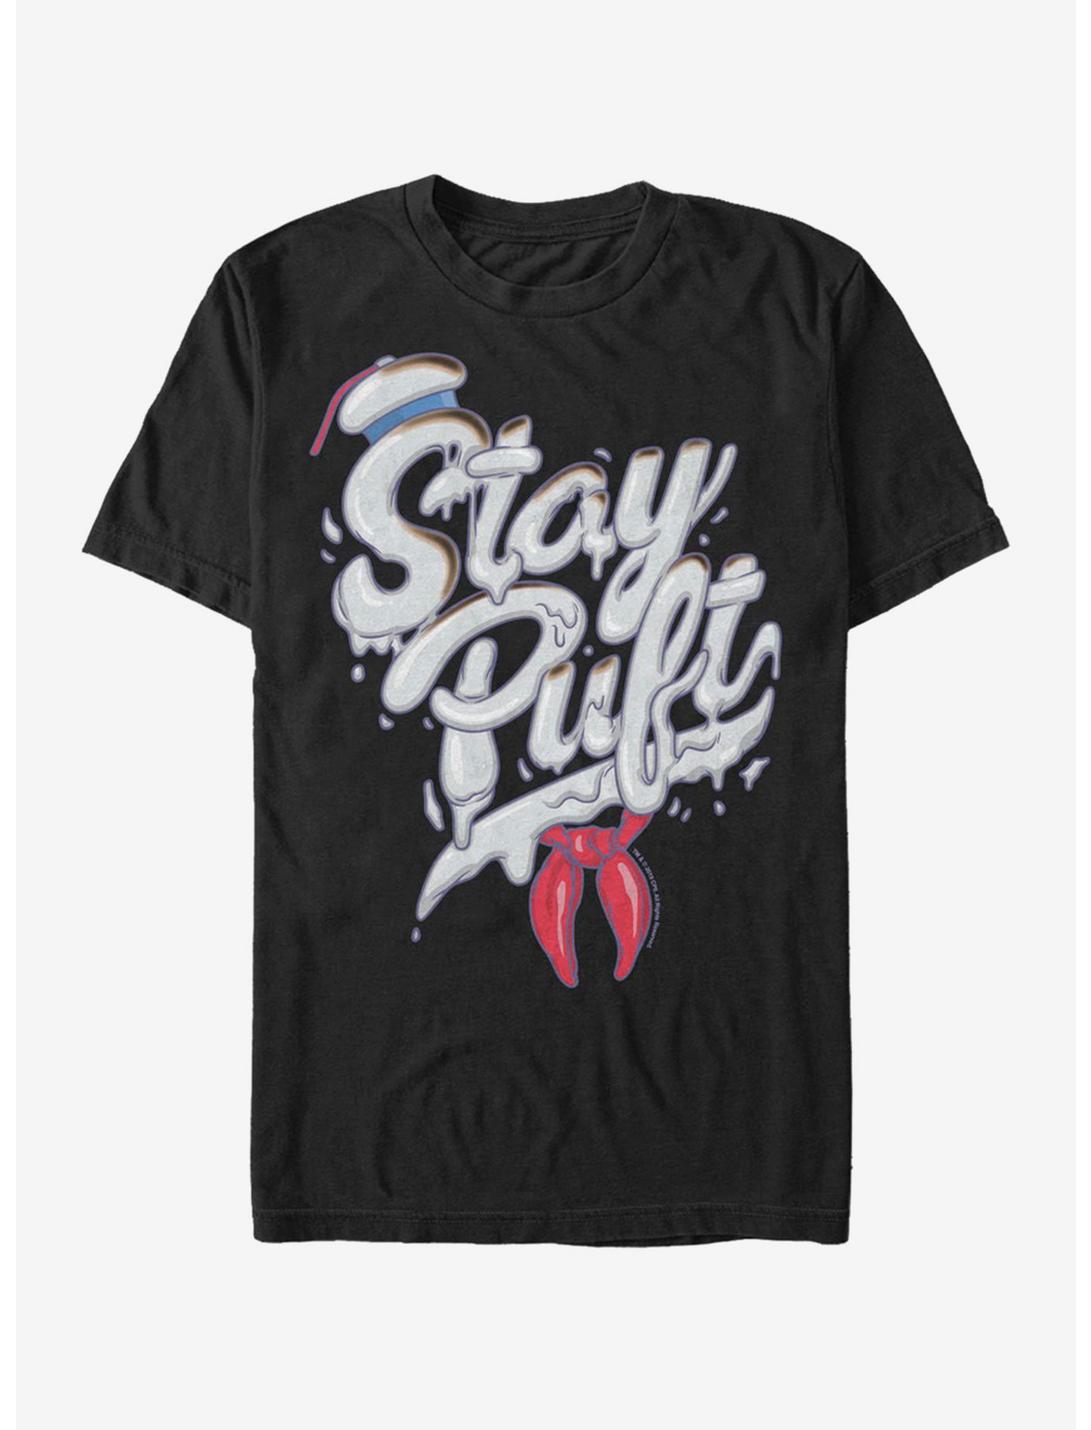 Ghostbusters Stay Puft T-Shirt, BLACK, hi-res